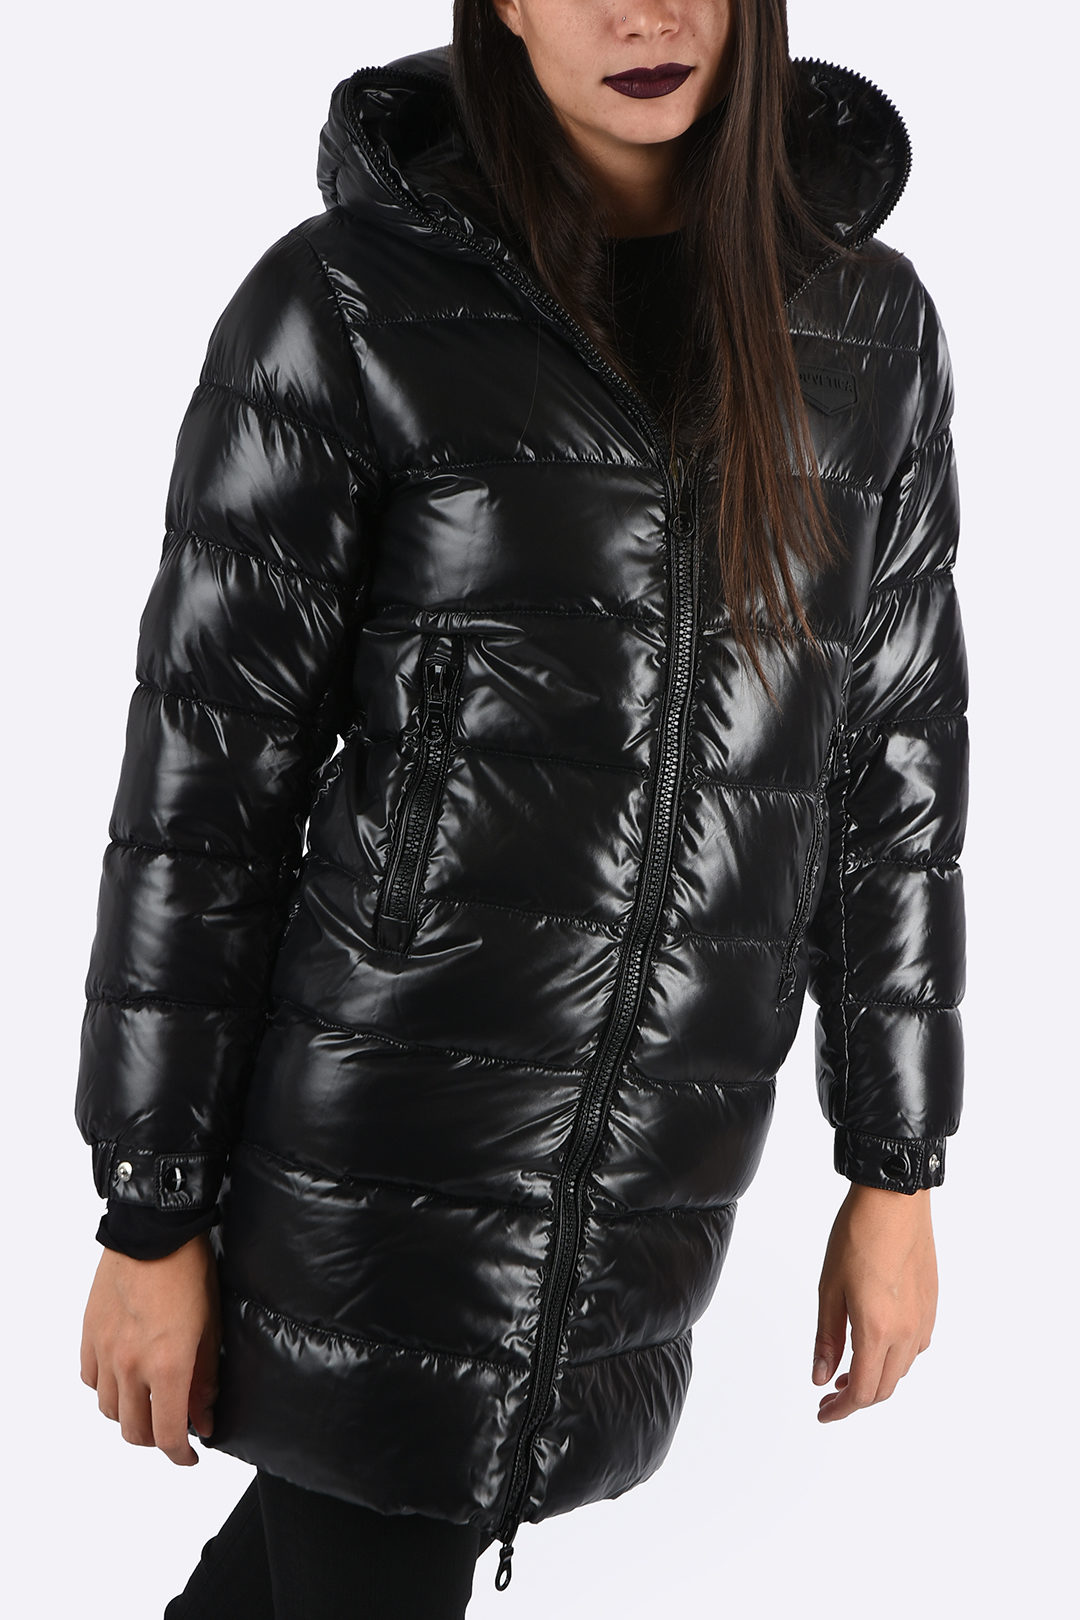 Duvetica Three-Quarter Length TYL Down Jacket women - Glamood Outlet